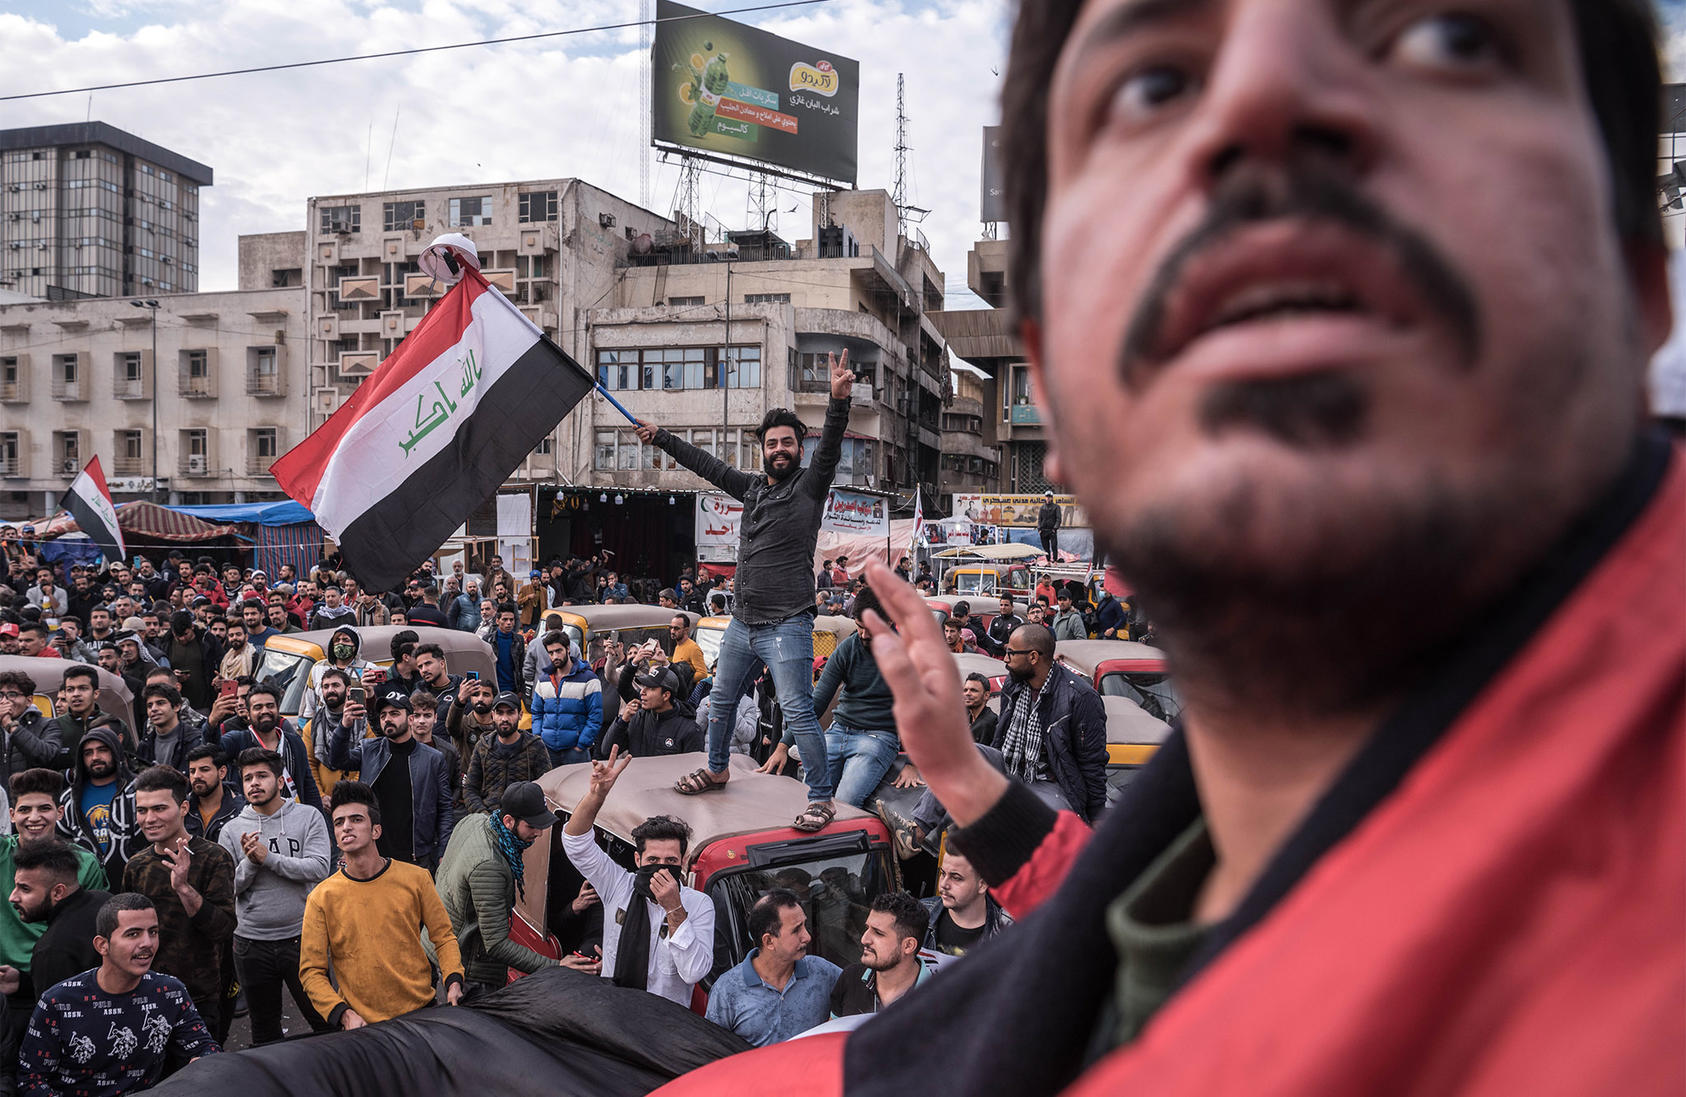 Iraqi demonstrators shout slogans during anti-government protests in Baghdad on Friday, Jan. 10, 2020. (Sergey Ponomarev/The New York Times)